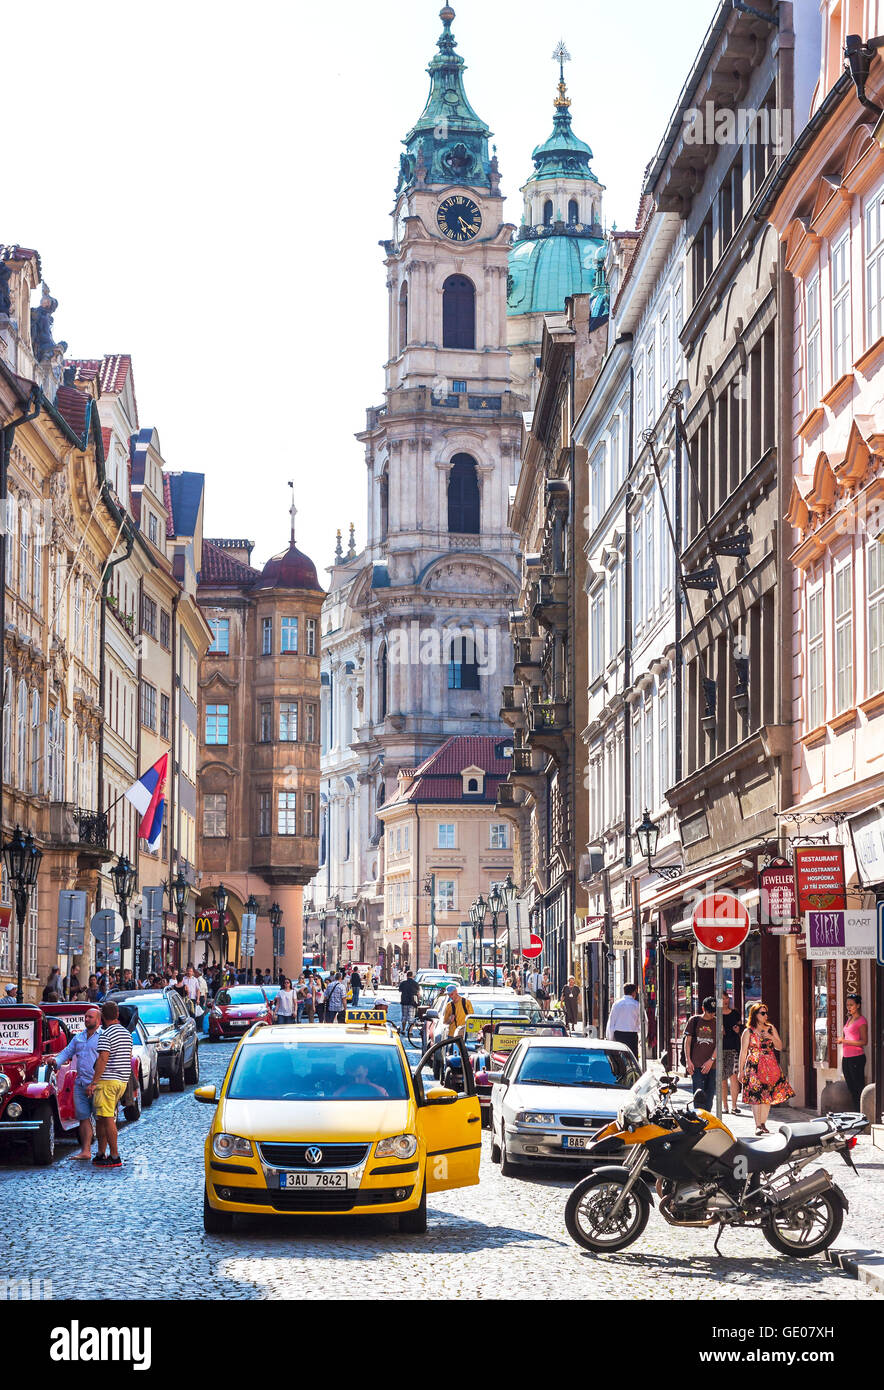 PRAGUE, CZECH REPUBLIC - JUNE 12, 2014:  Street of Prague crowded with tourists and vehicles. Stock Photo